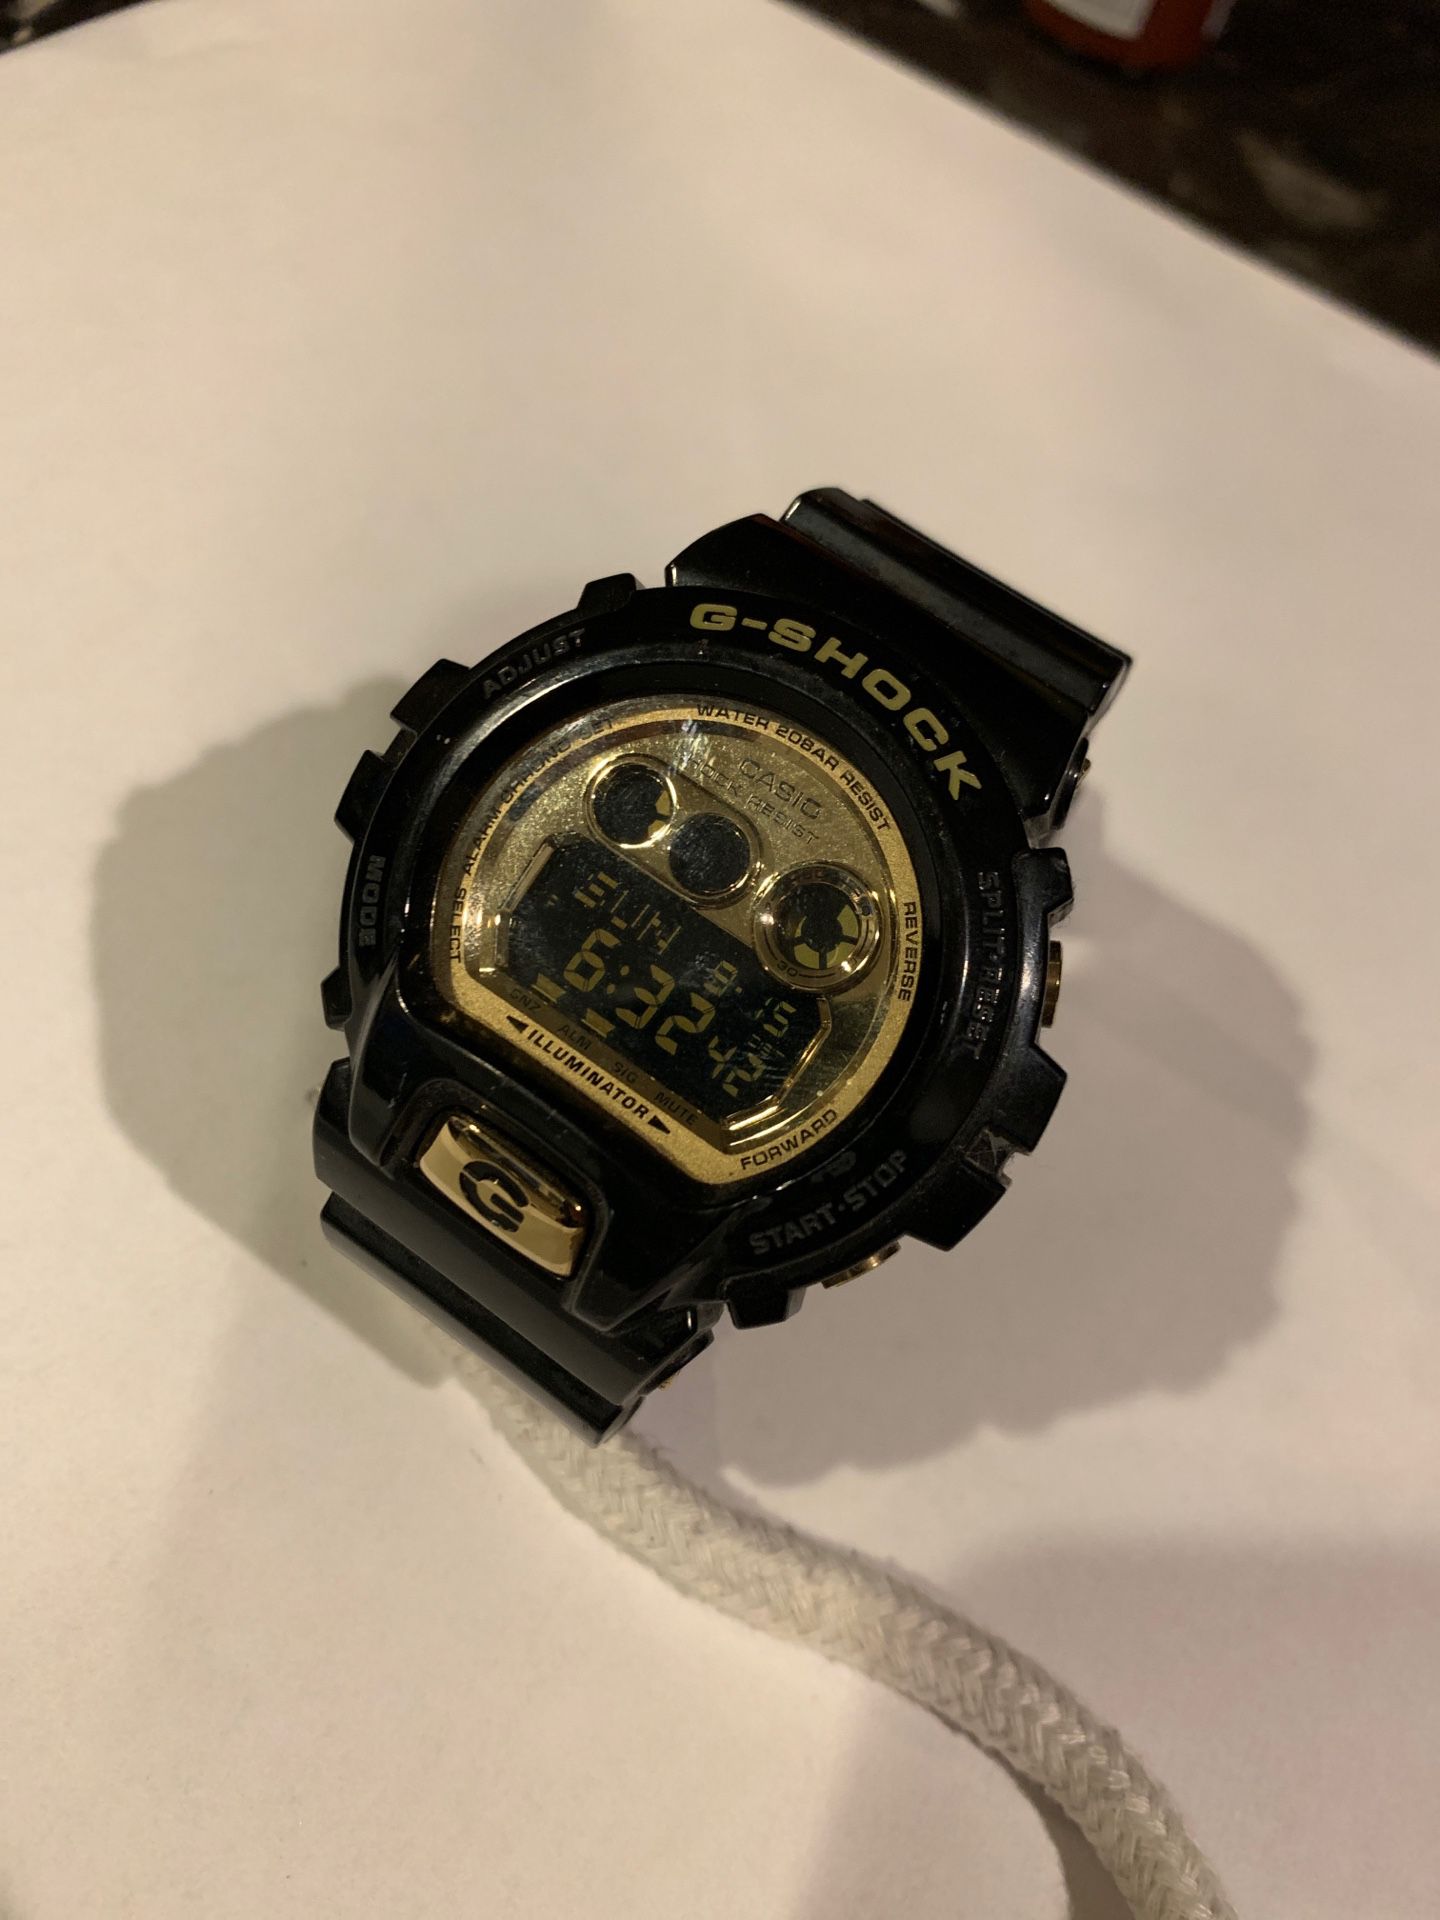 G-shock black and gold